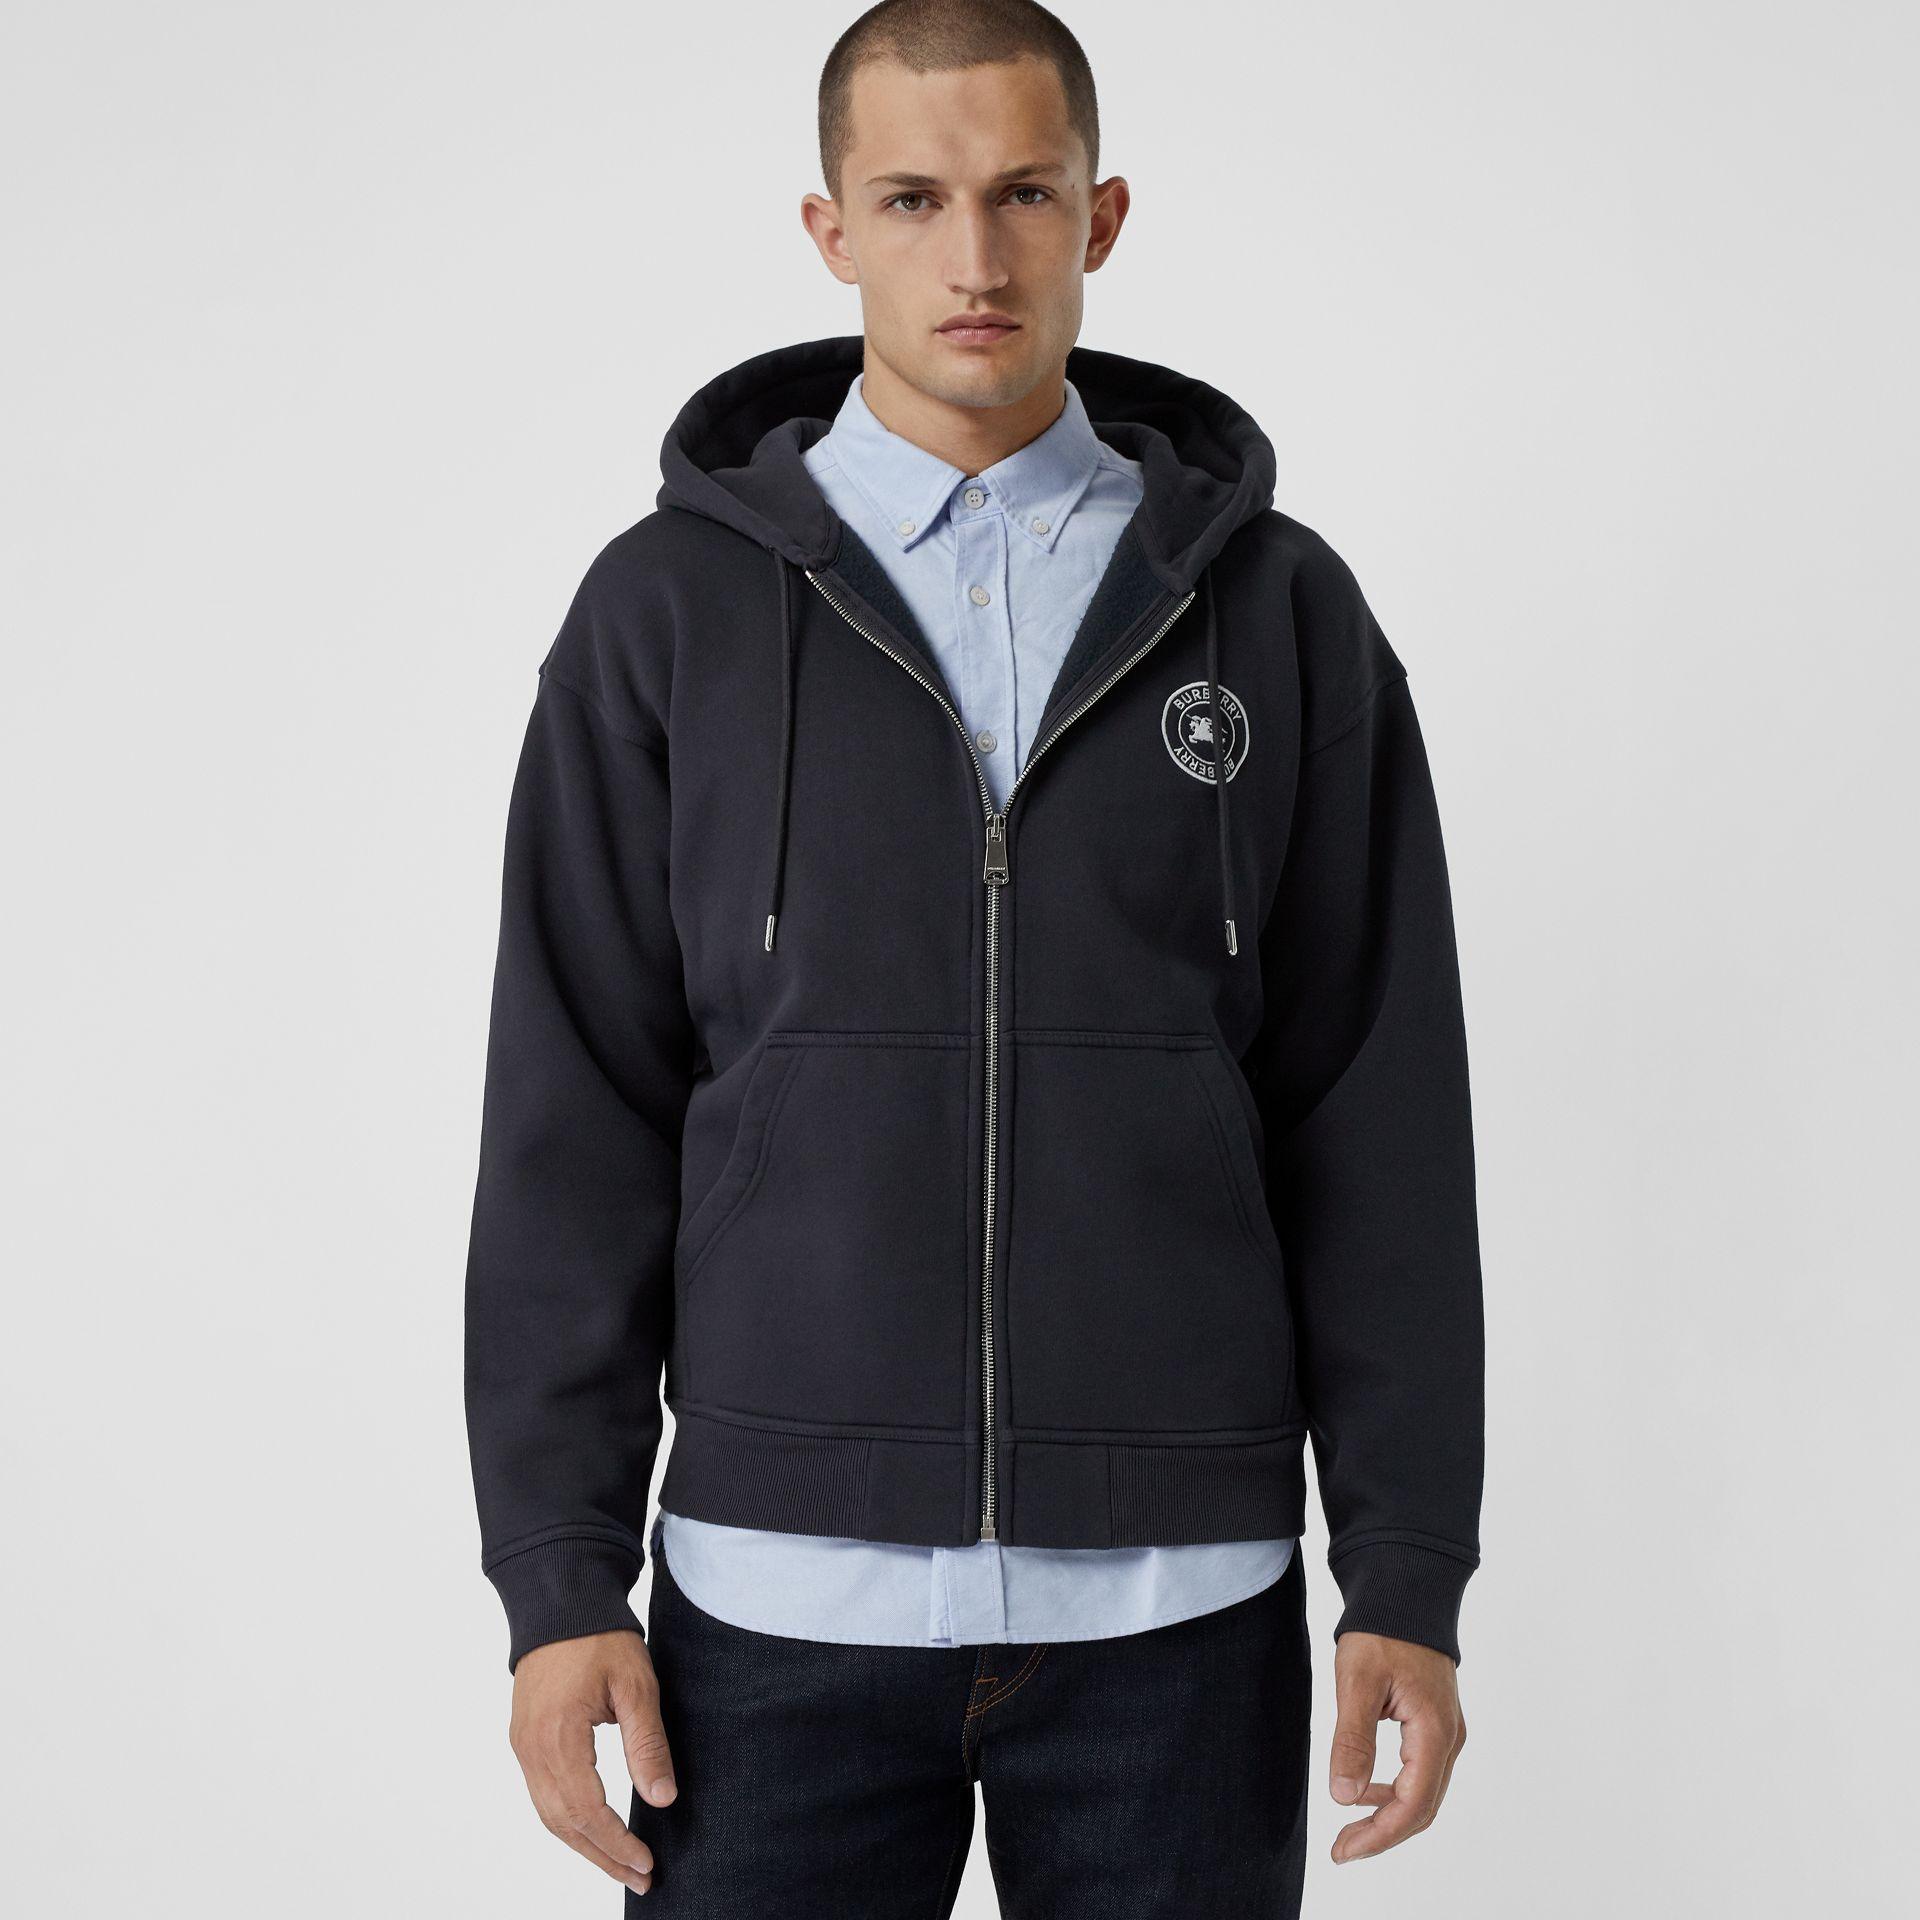 burberry jersey hooded top